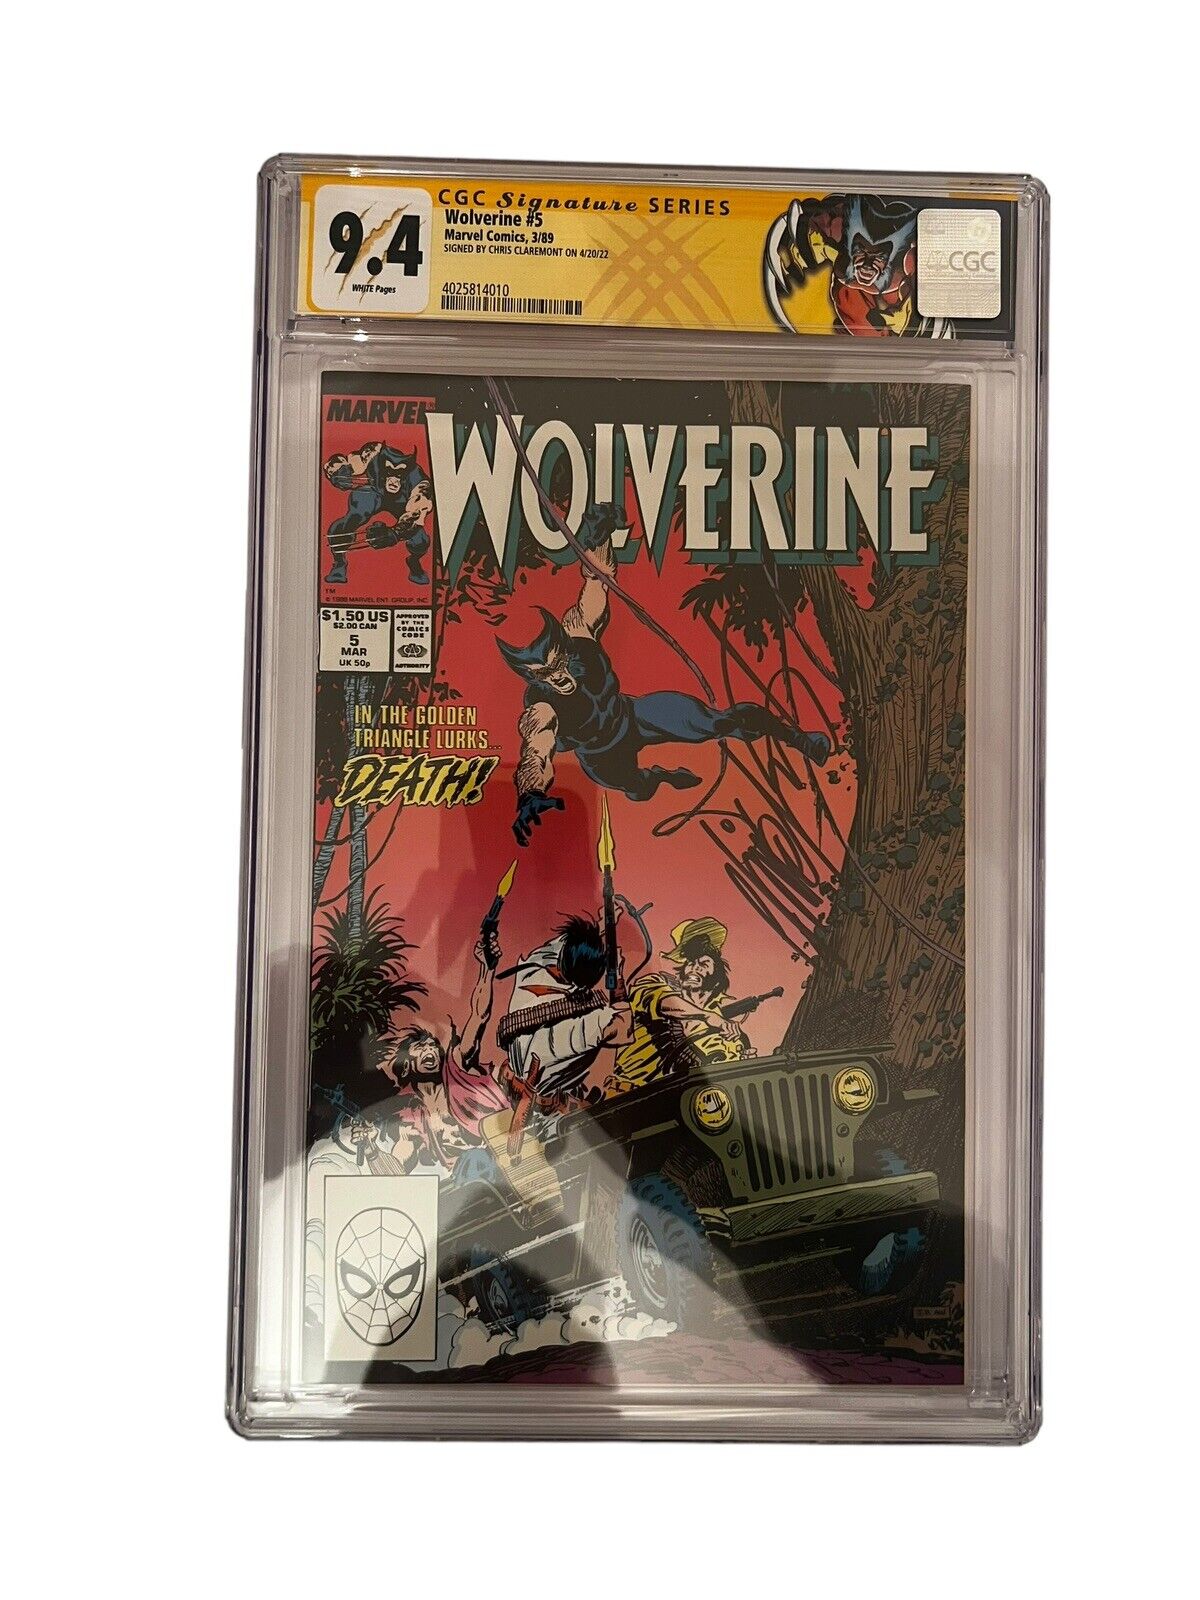 Wolverine #5 CGC 9.4 Marvel 03/1989, Signed by Chris Claremont Wolverine Label